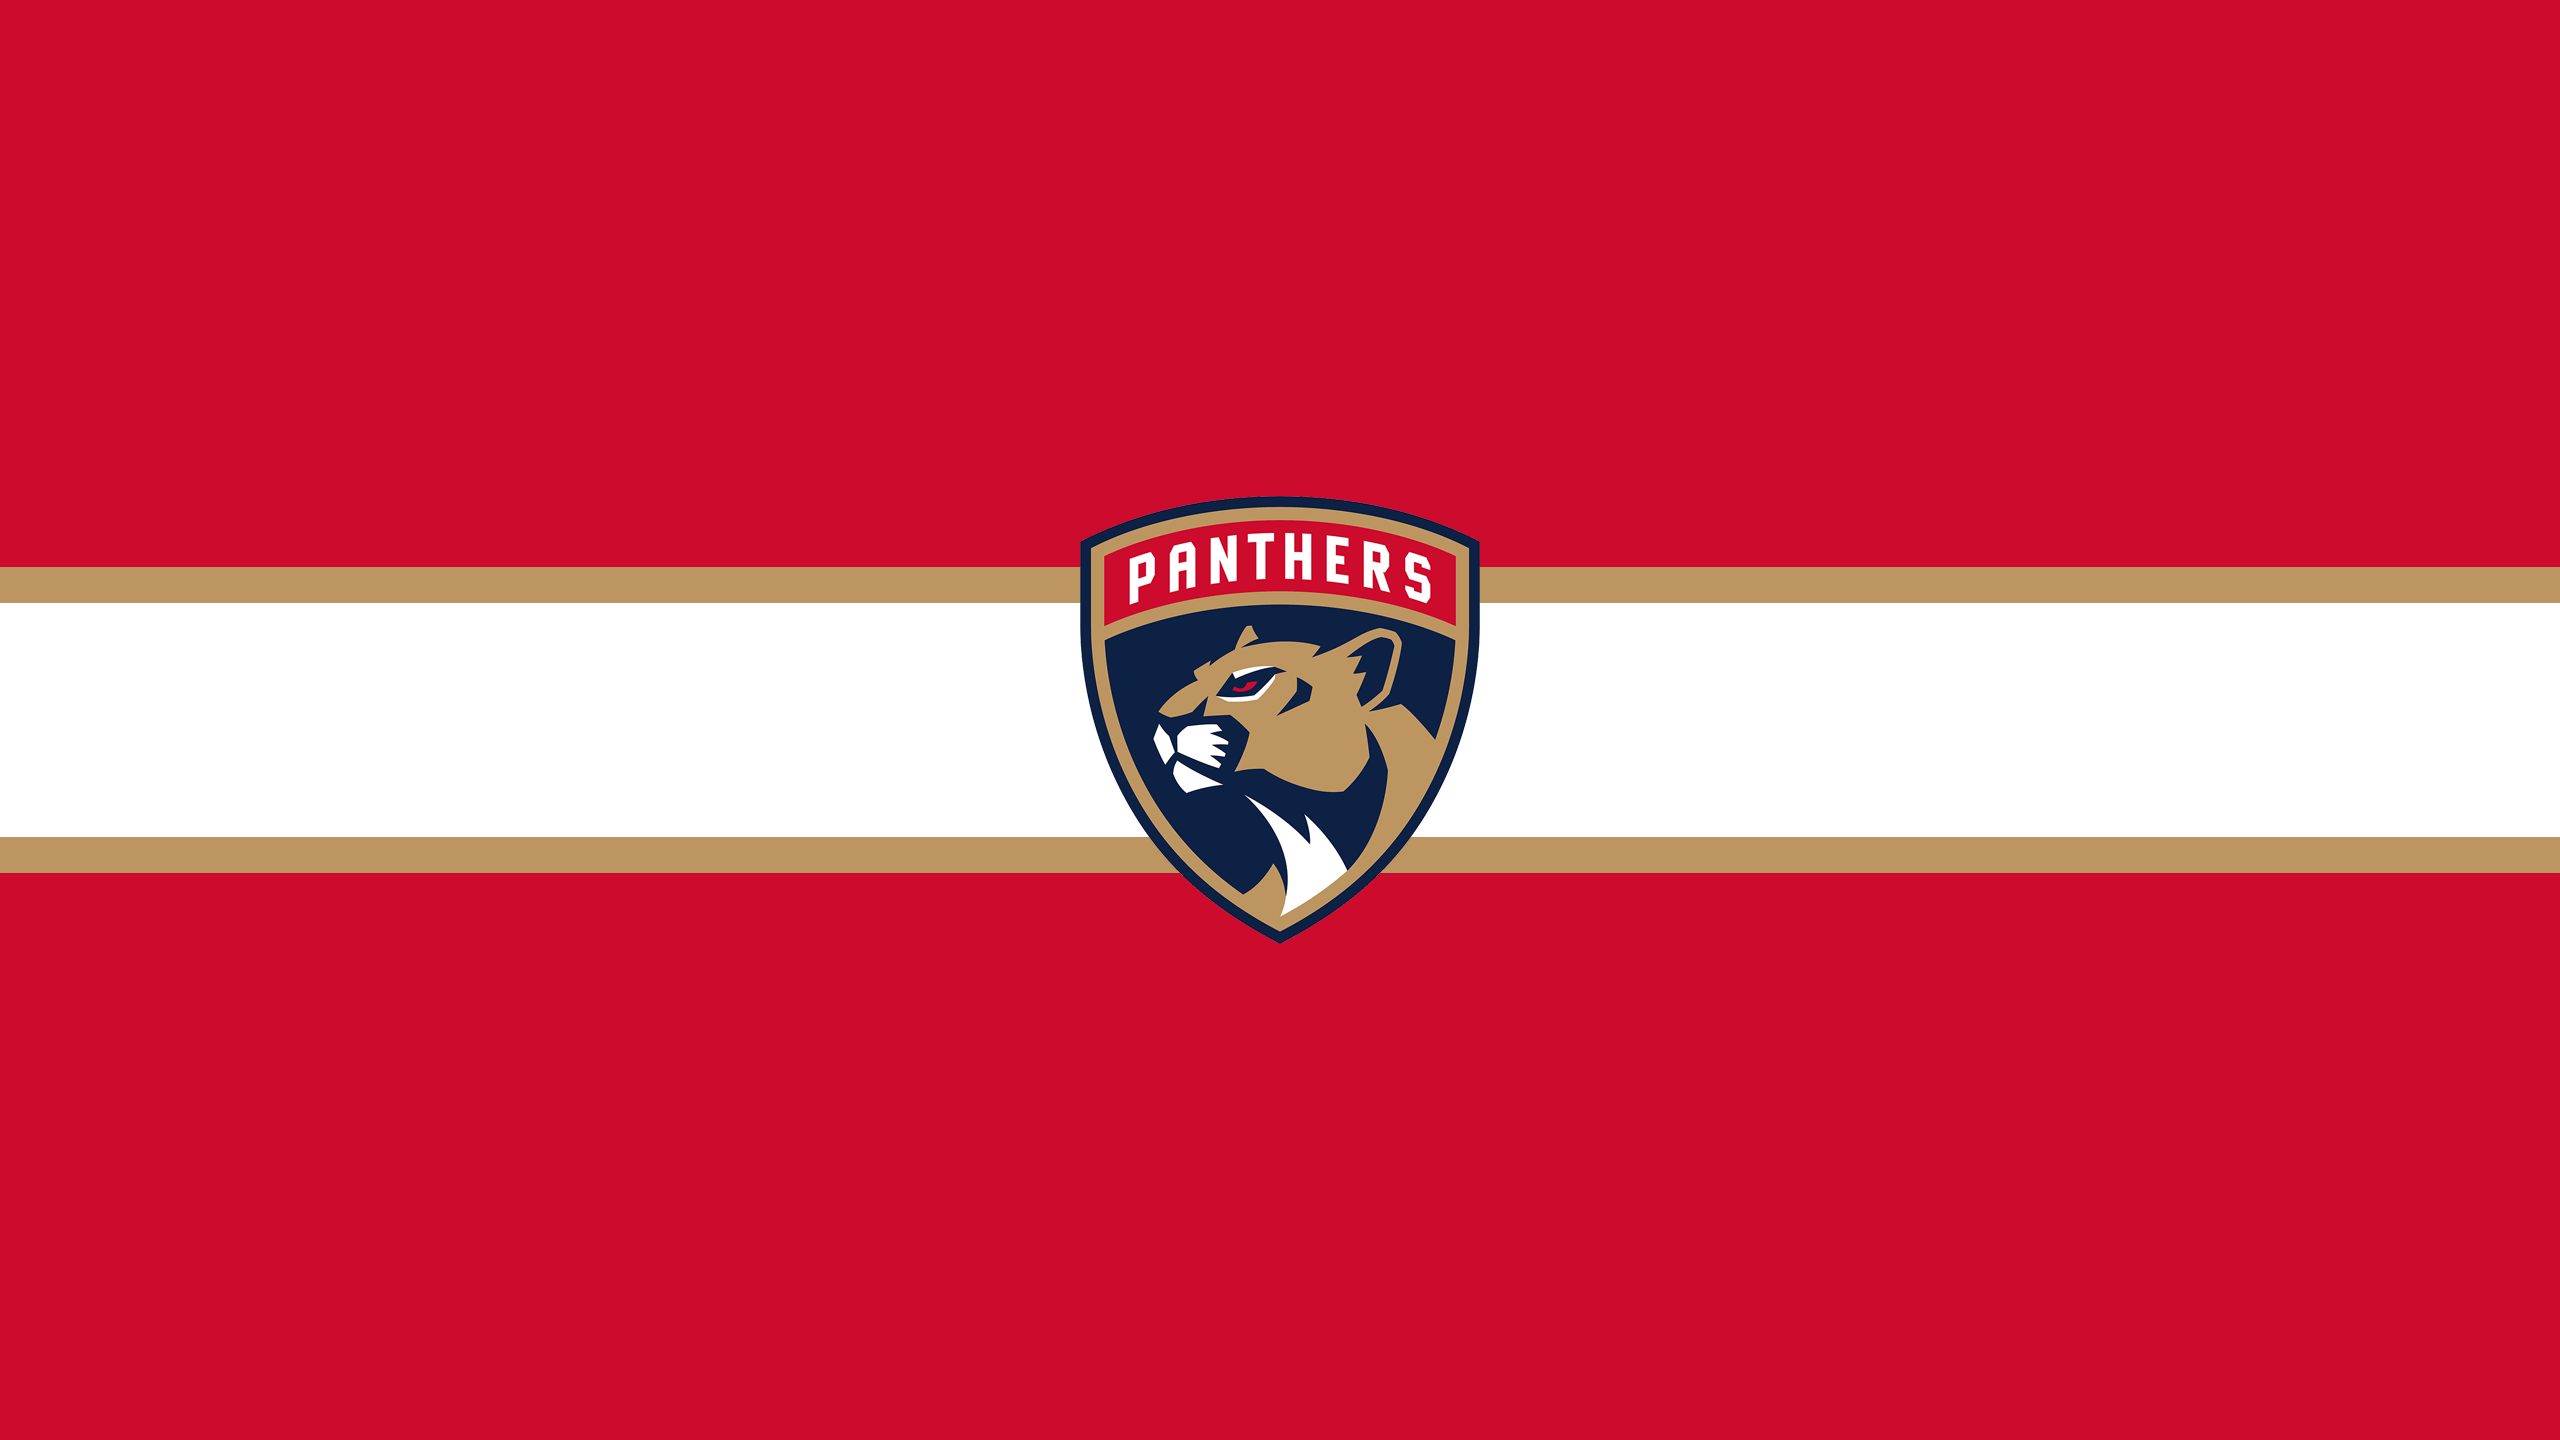 VK197 Florida Panthers Wallpapers 2560x1440 px   4USkY